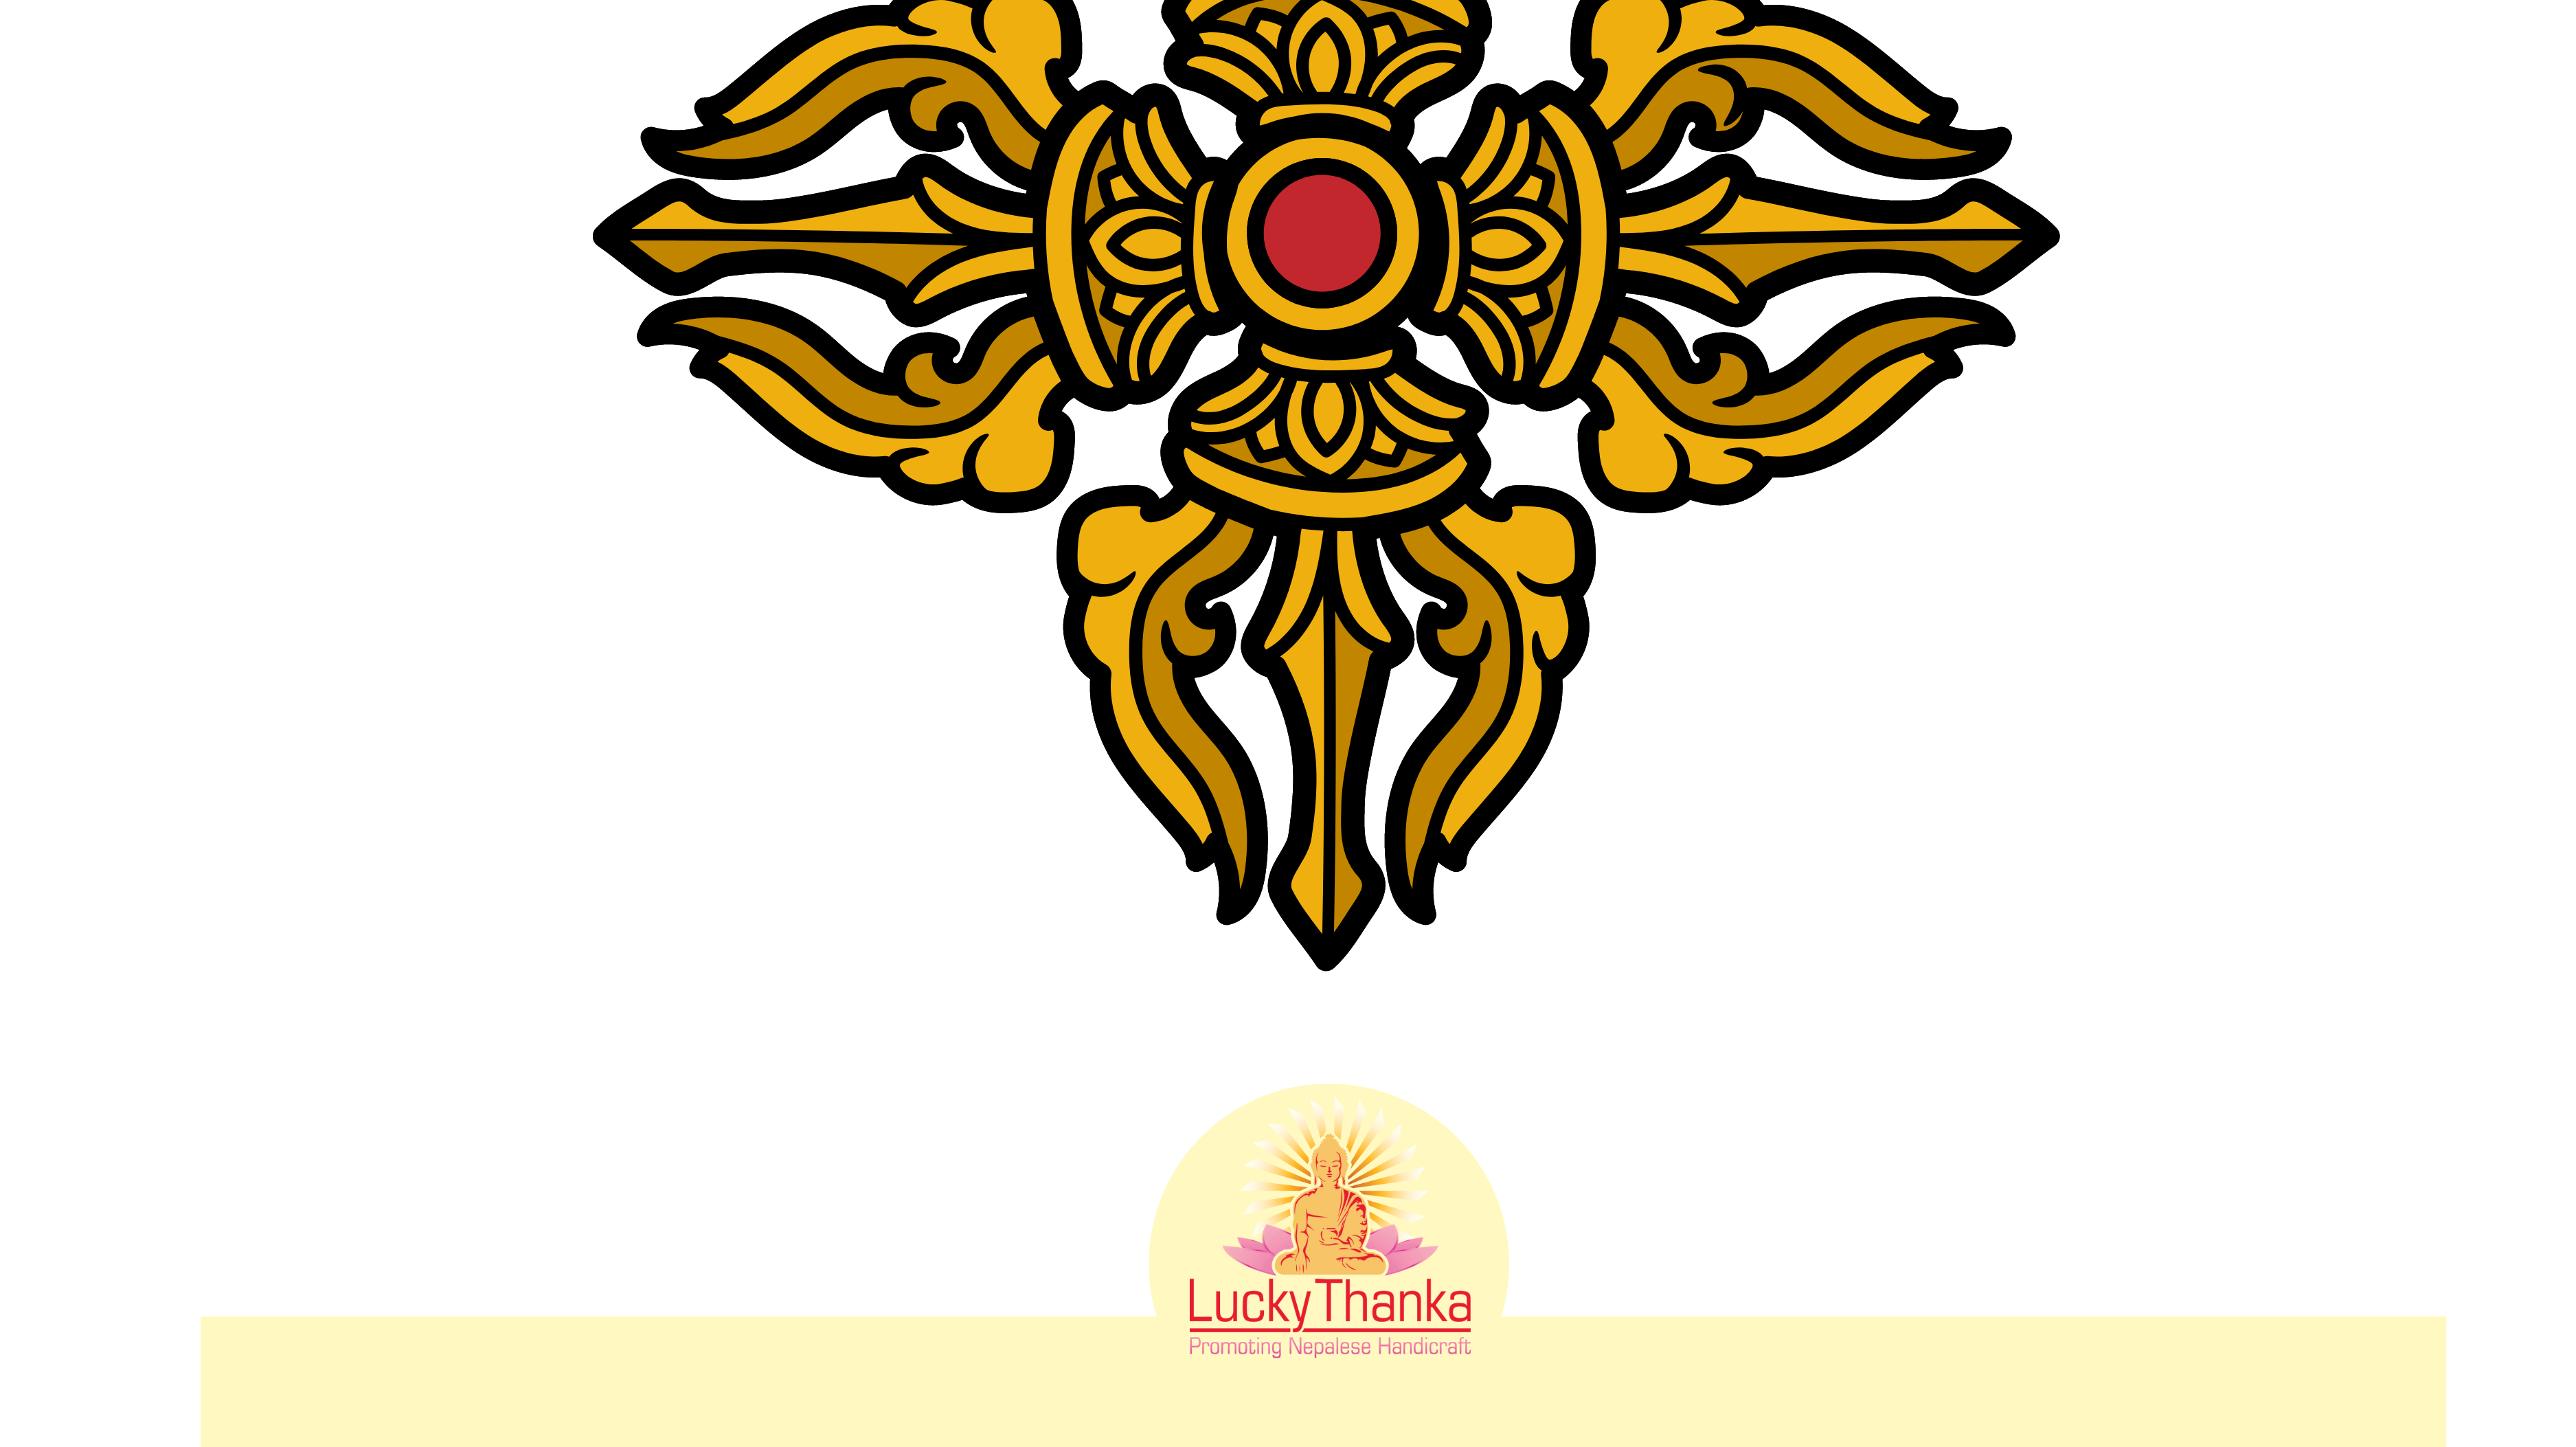 Vajra meaning in thangka and other symbols